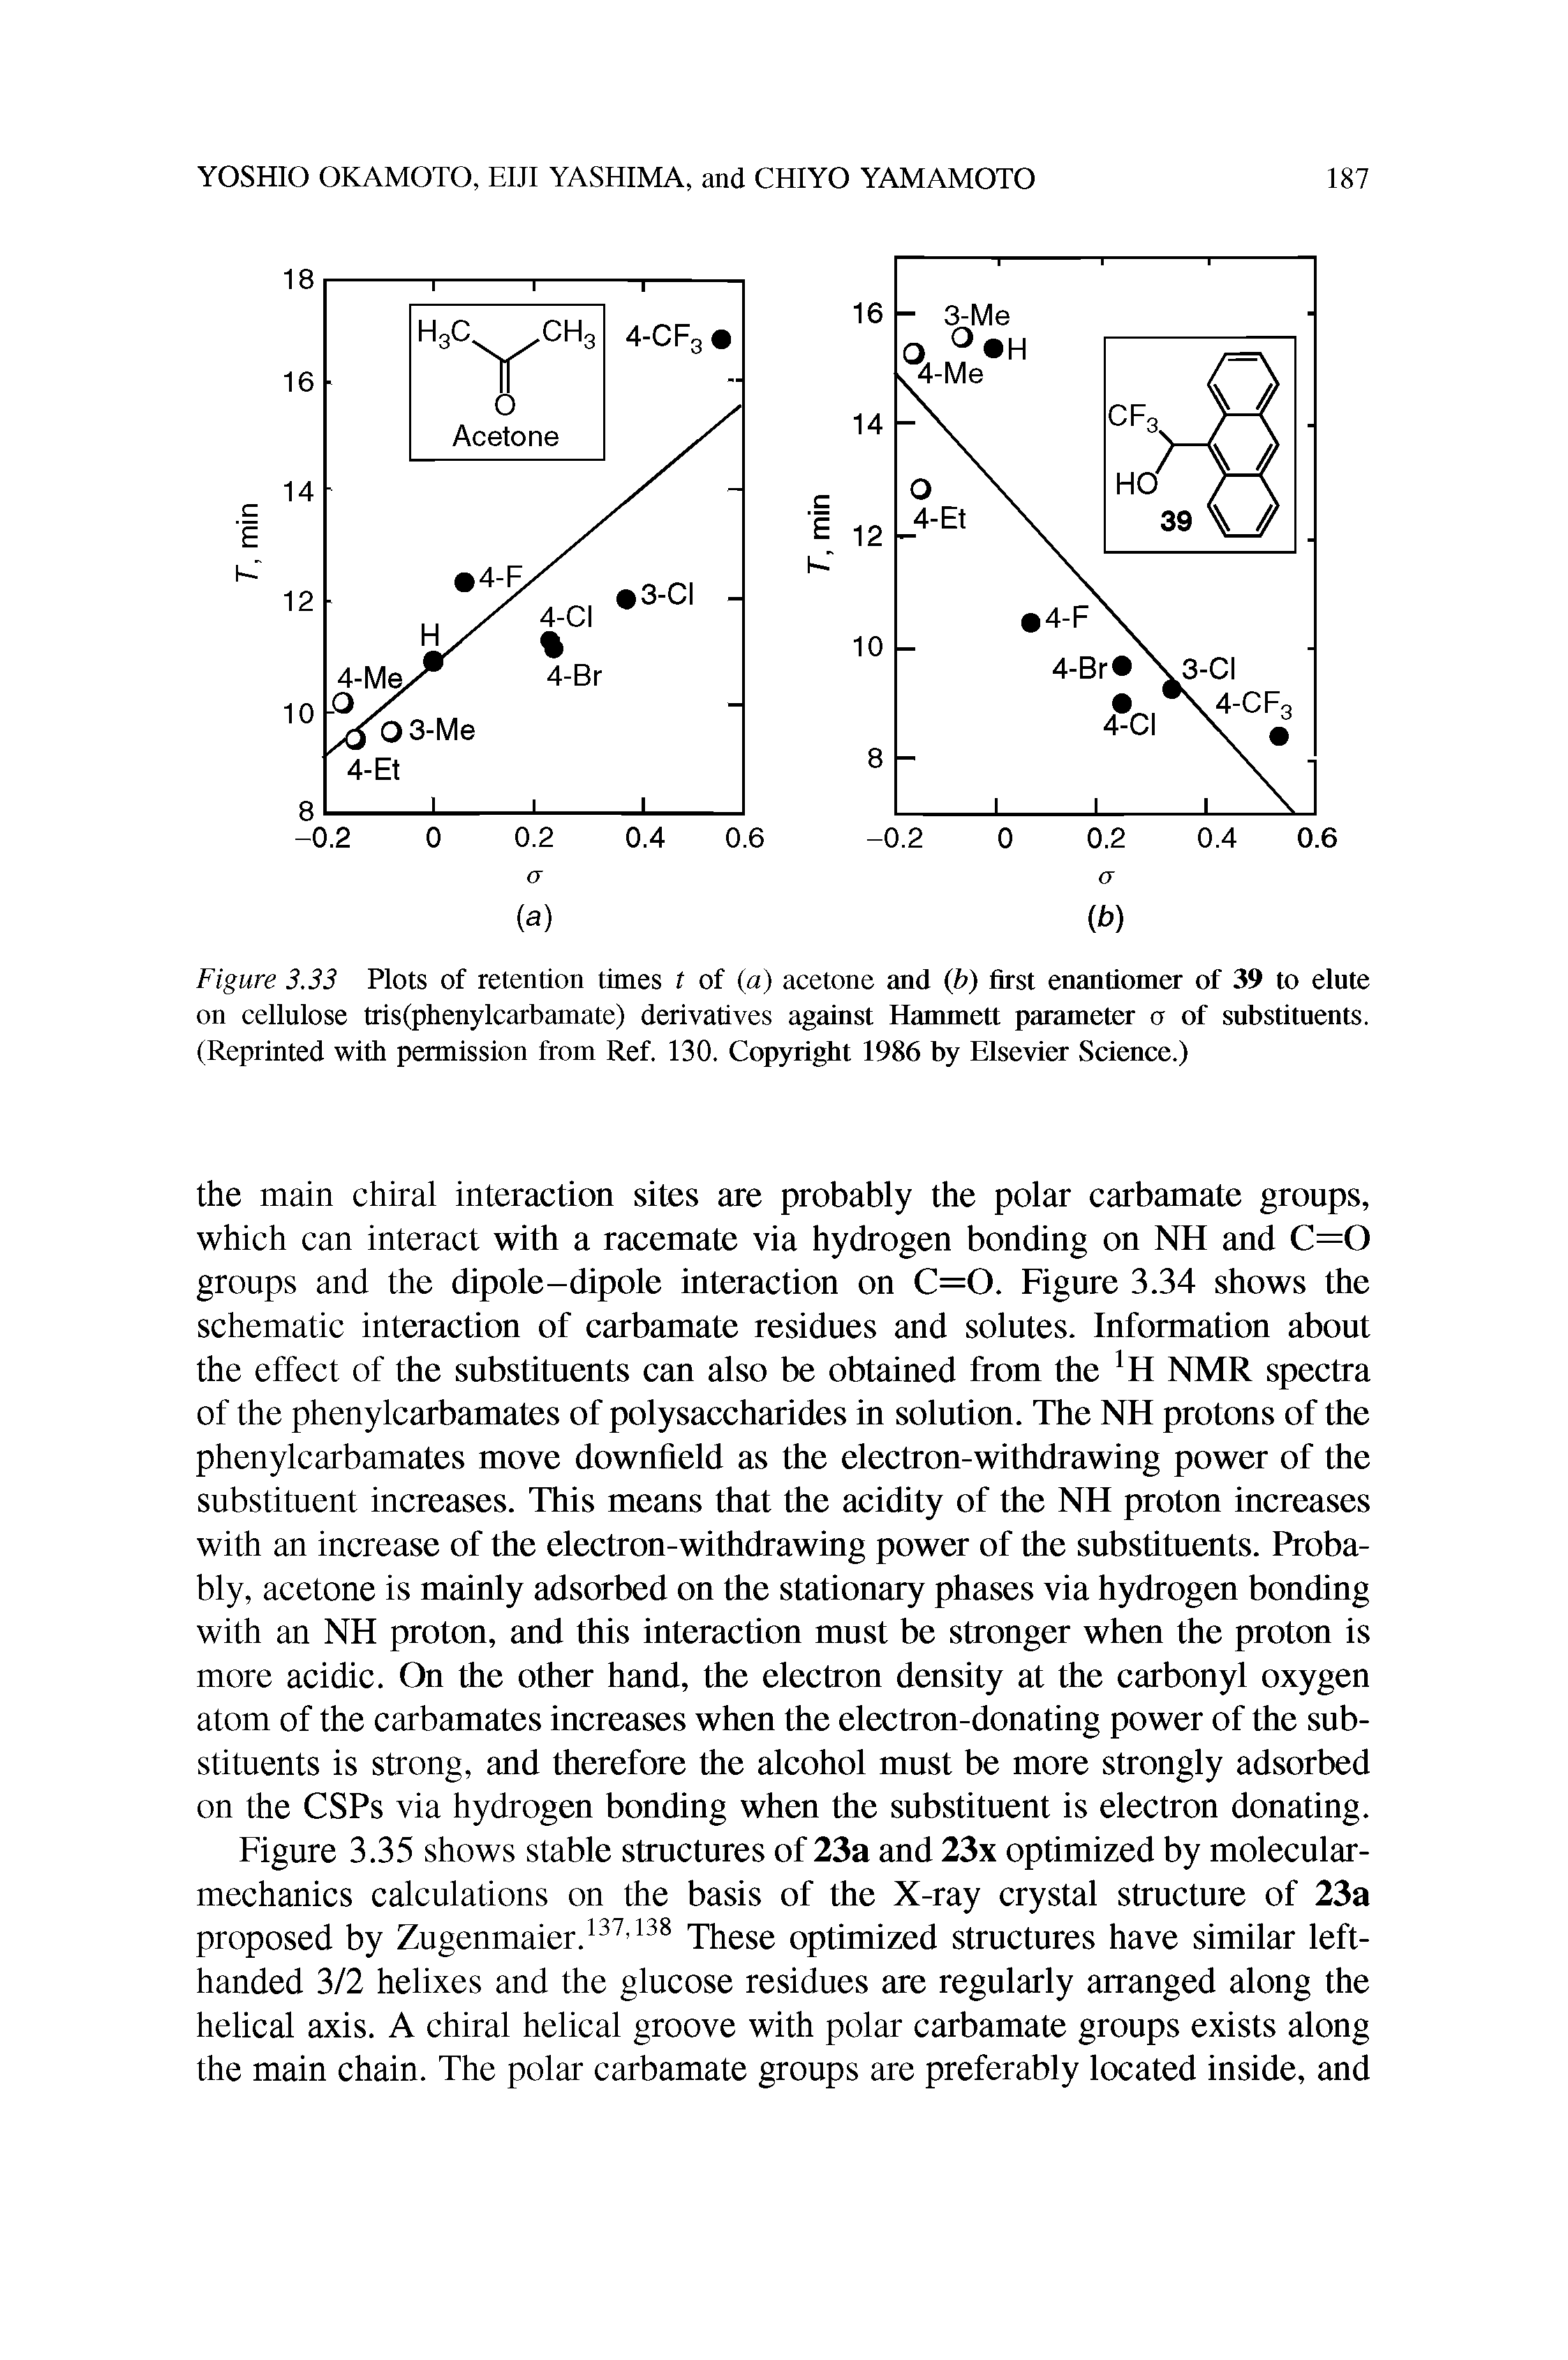 Figure 3.33 Plots of retention times t of (a) acetone and (b) first enantiomer of 39 to elute on cellulose tris(phenylcarbamate) derivatives against Hammett parameter a of substituents. (Reprinted with permission from Ref. 130. Copyright 1986 by Elsevier Science.)...